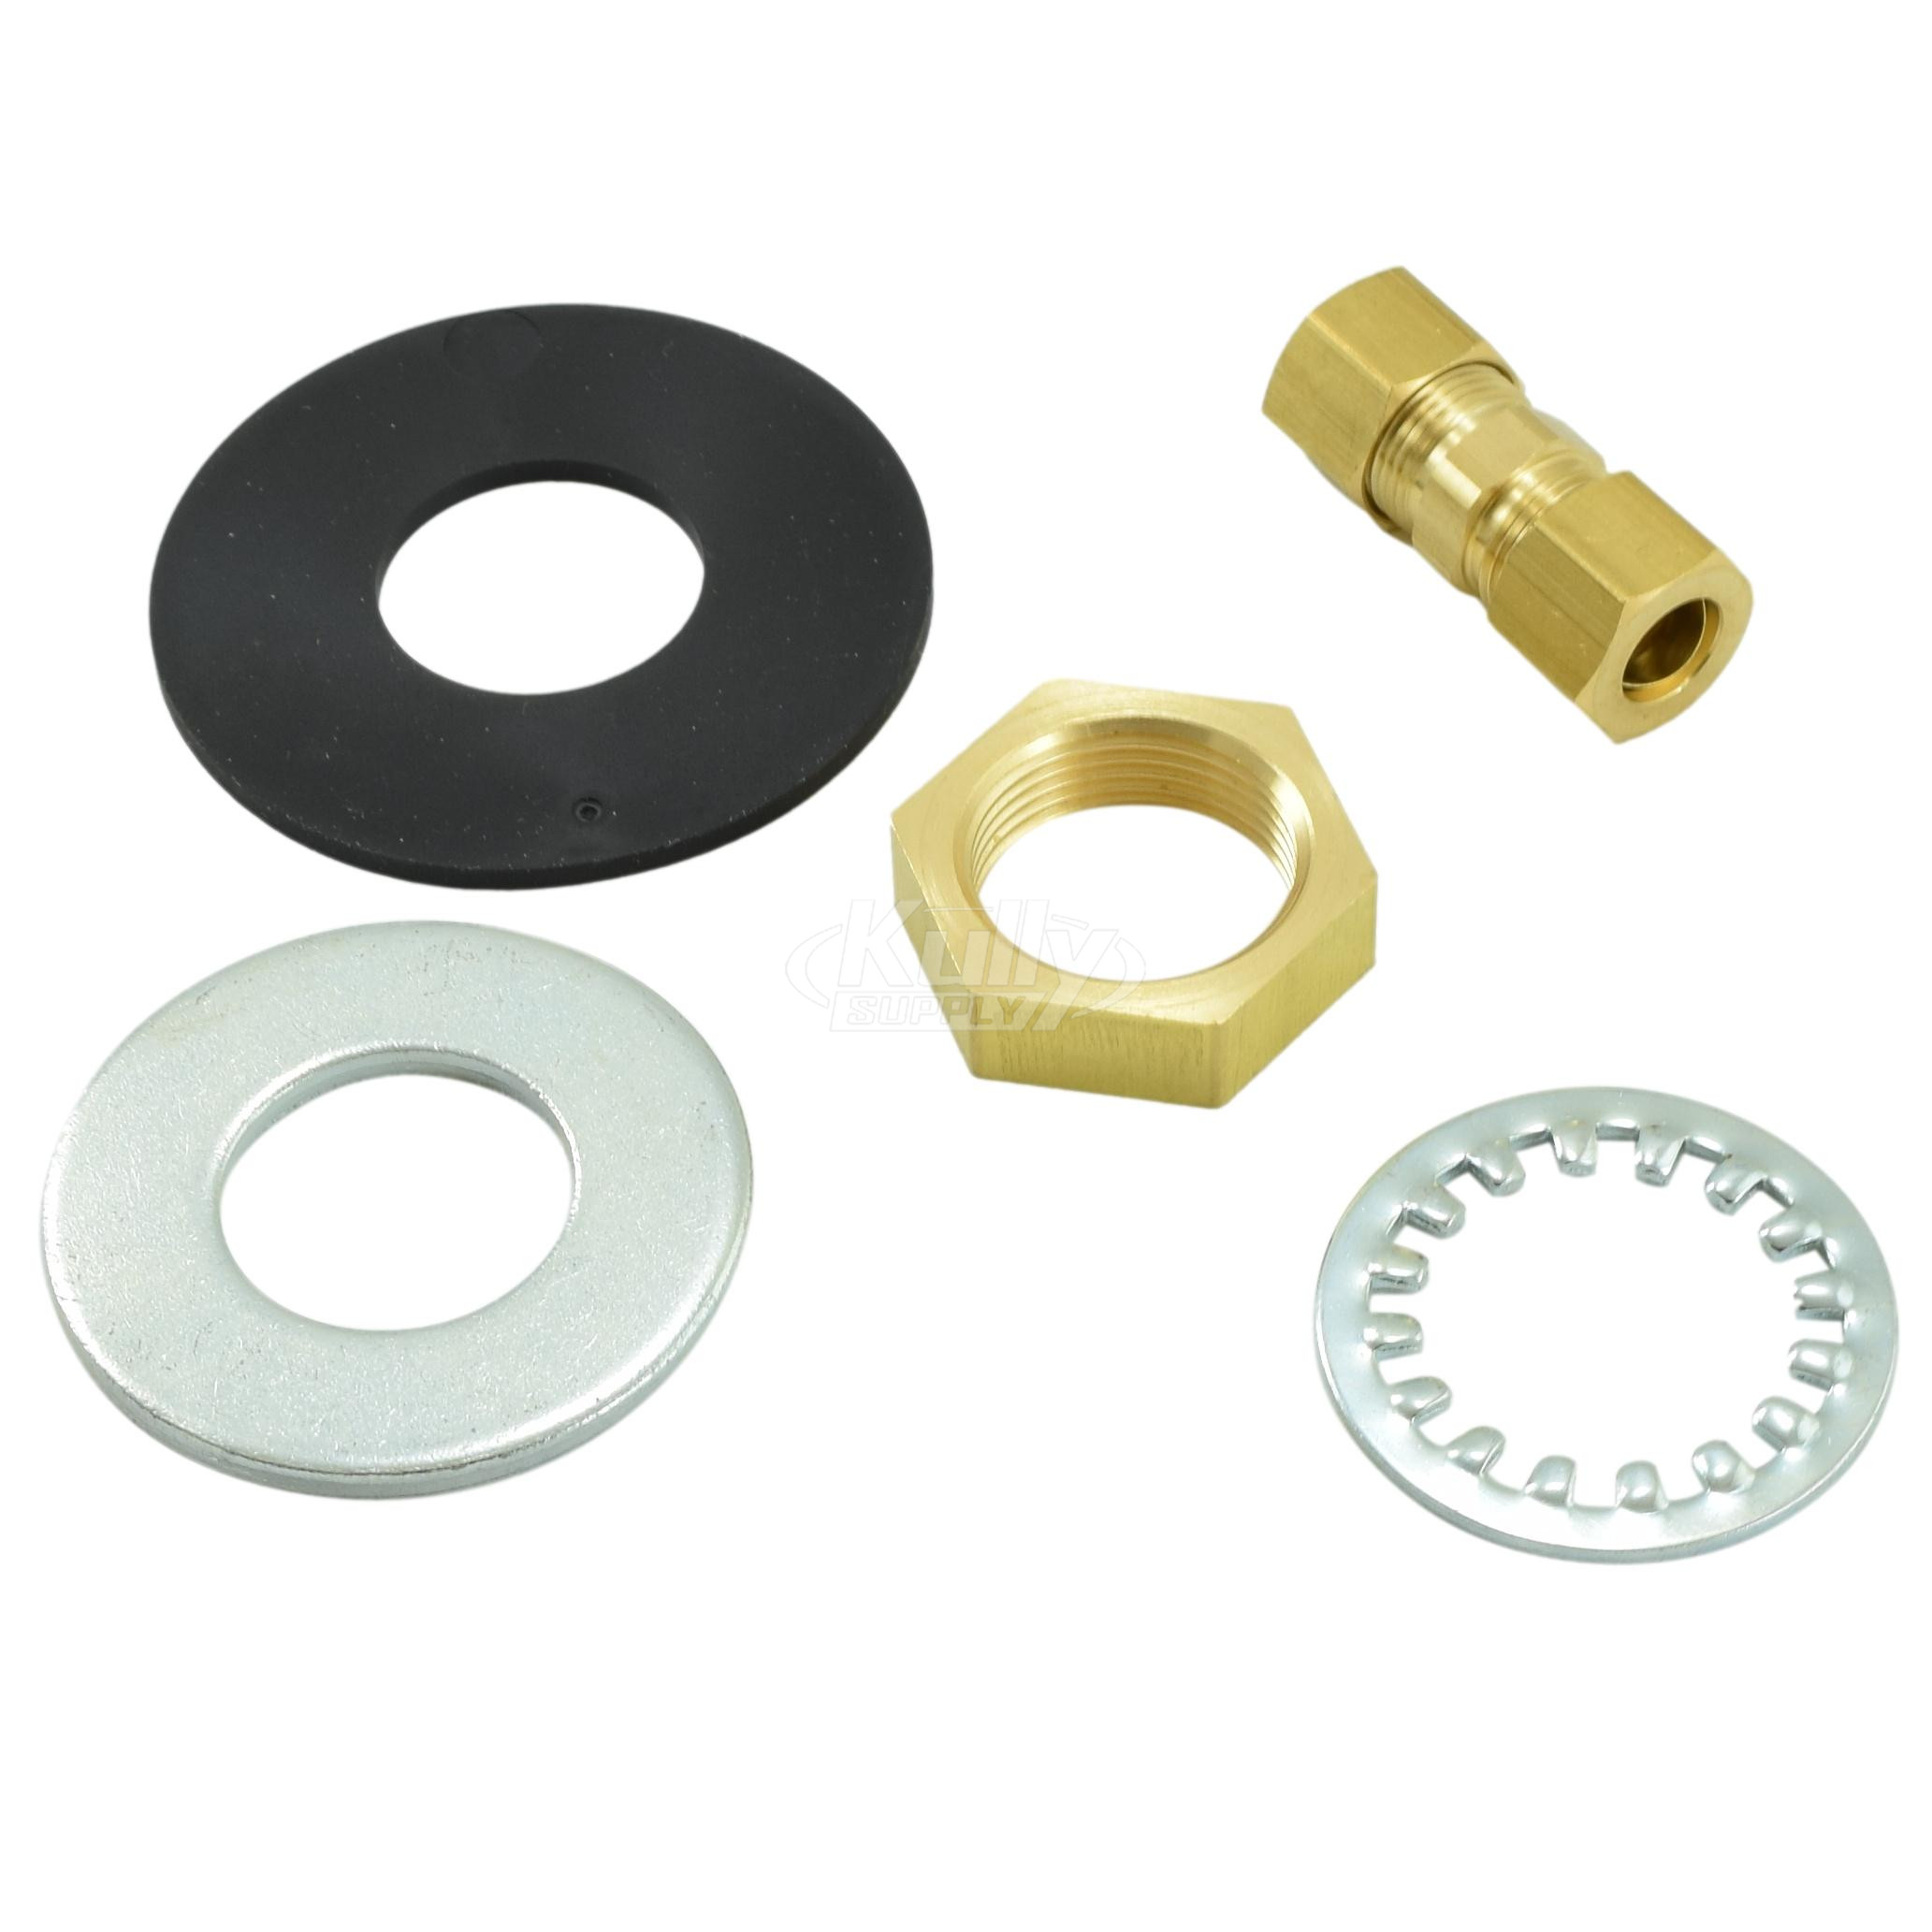 Sloan ETF-503-A Spout Mounting Kit (with Rubber Washer, Flat Washer, Lock Washer, & Mounting Nut)